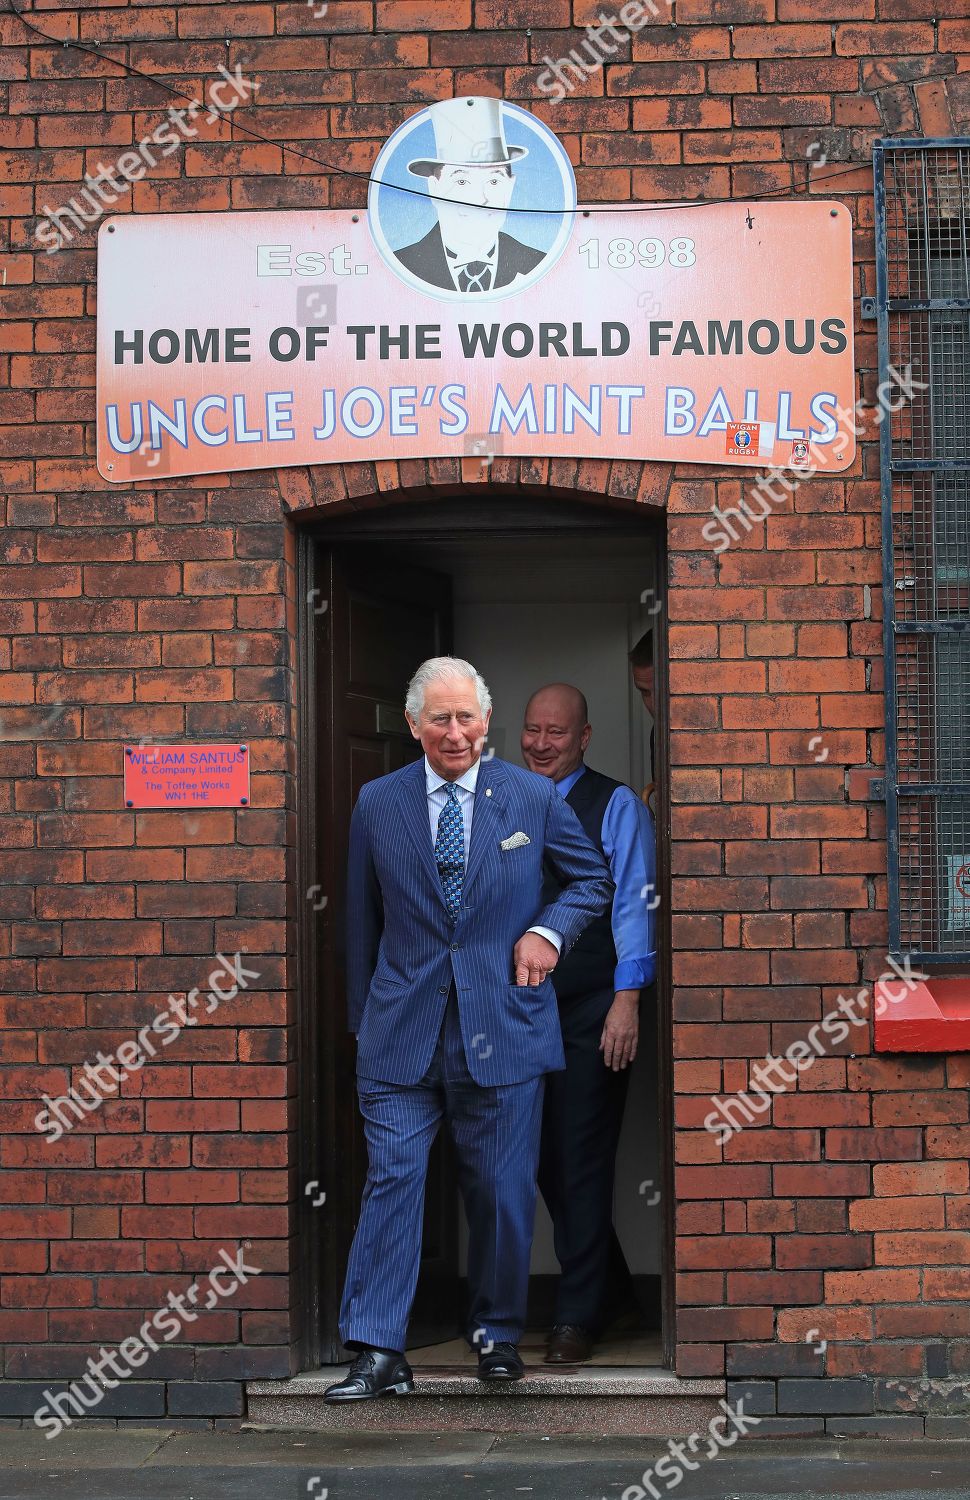 prince-charles-visit-to-greater-manchester-uk-shutterstock-editorial-10185724m.jpg